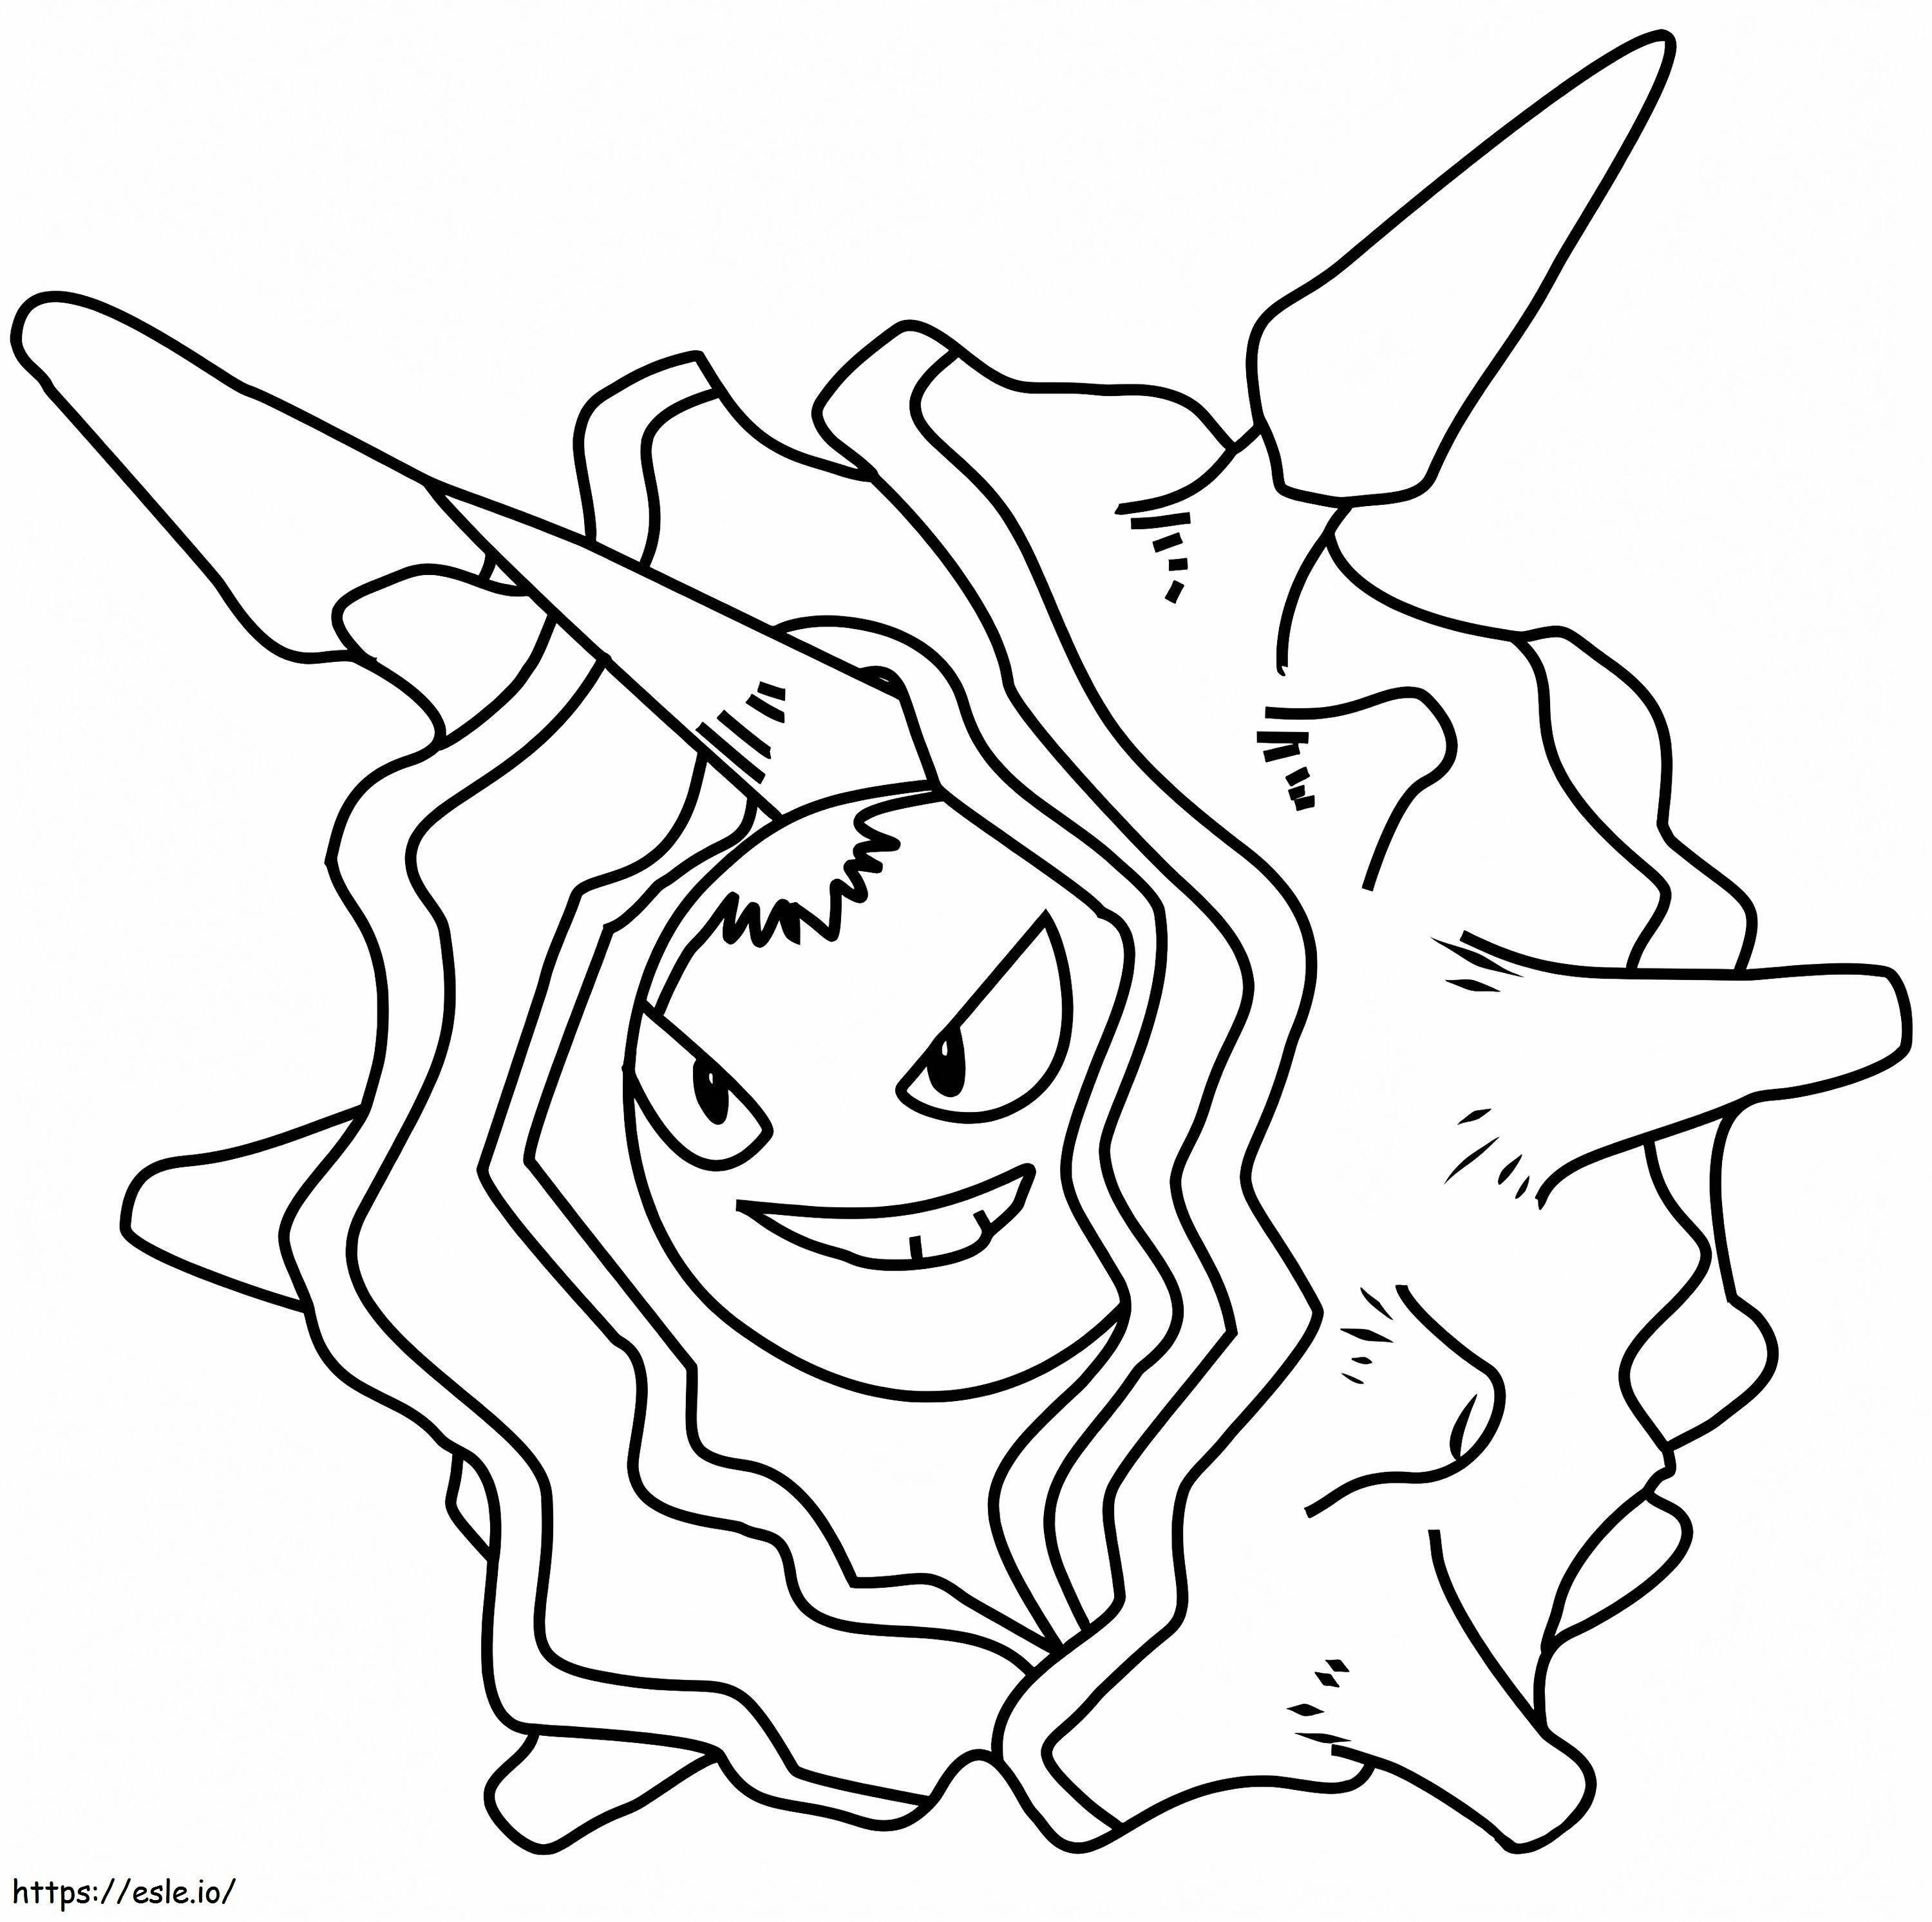 Cloyster Gen 1 Pokemon coloring page